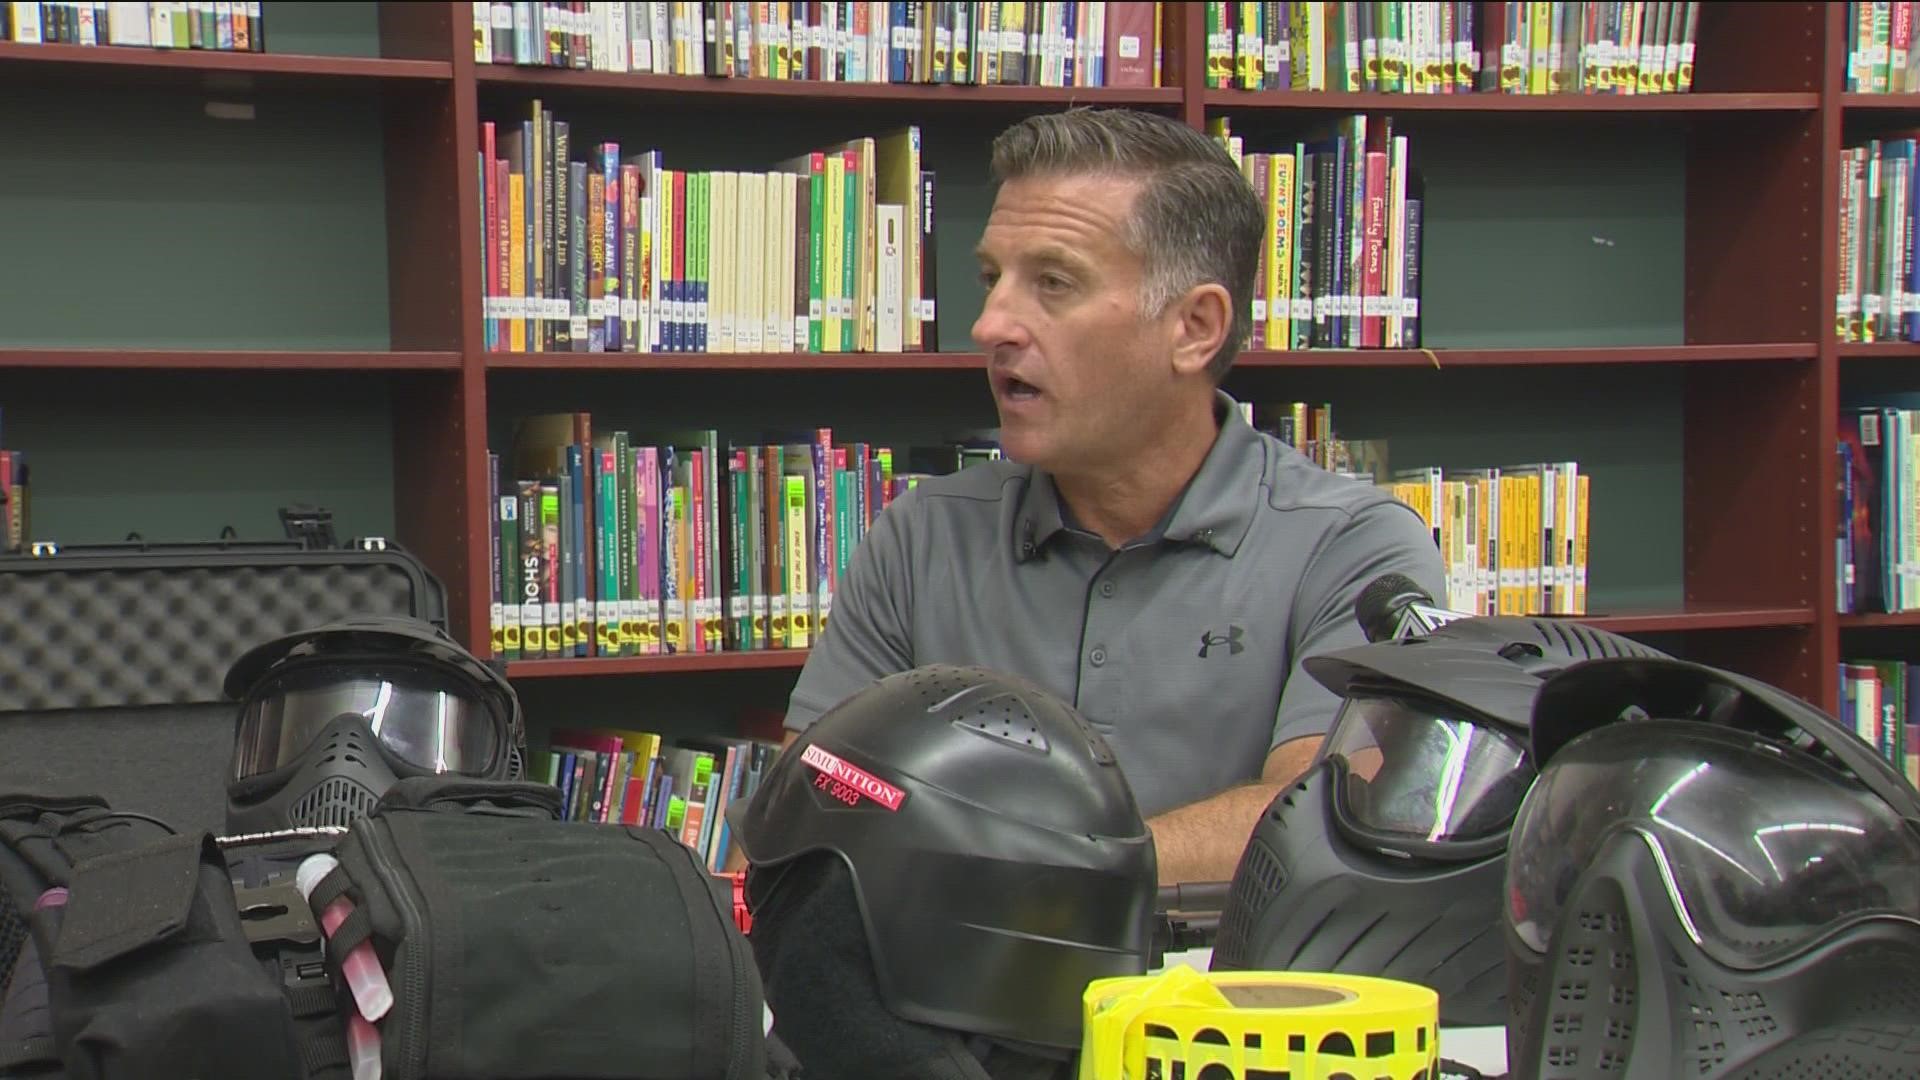 The Texas Commission on Law Enforcement shared more about the state's school marshal program, which allows school staff to carry guns in schools.